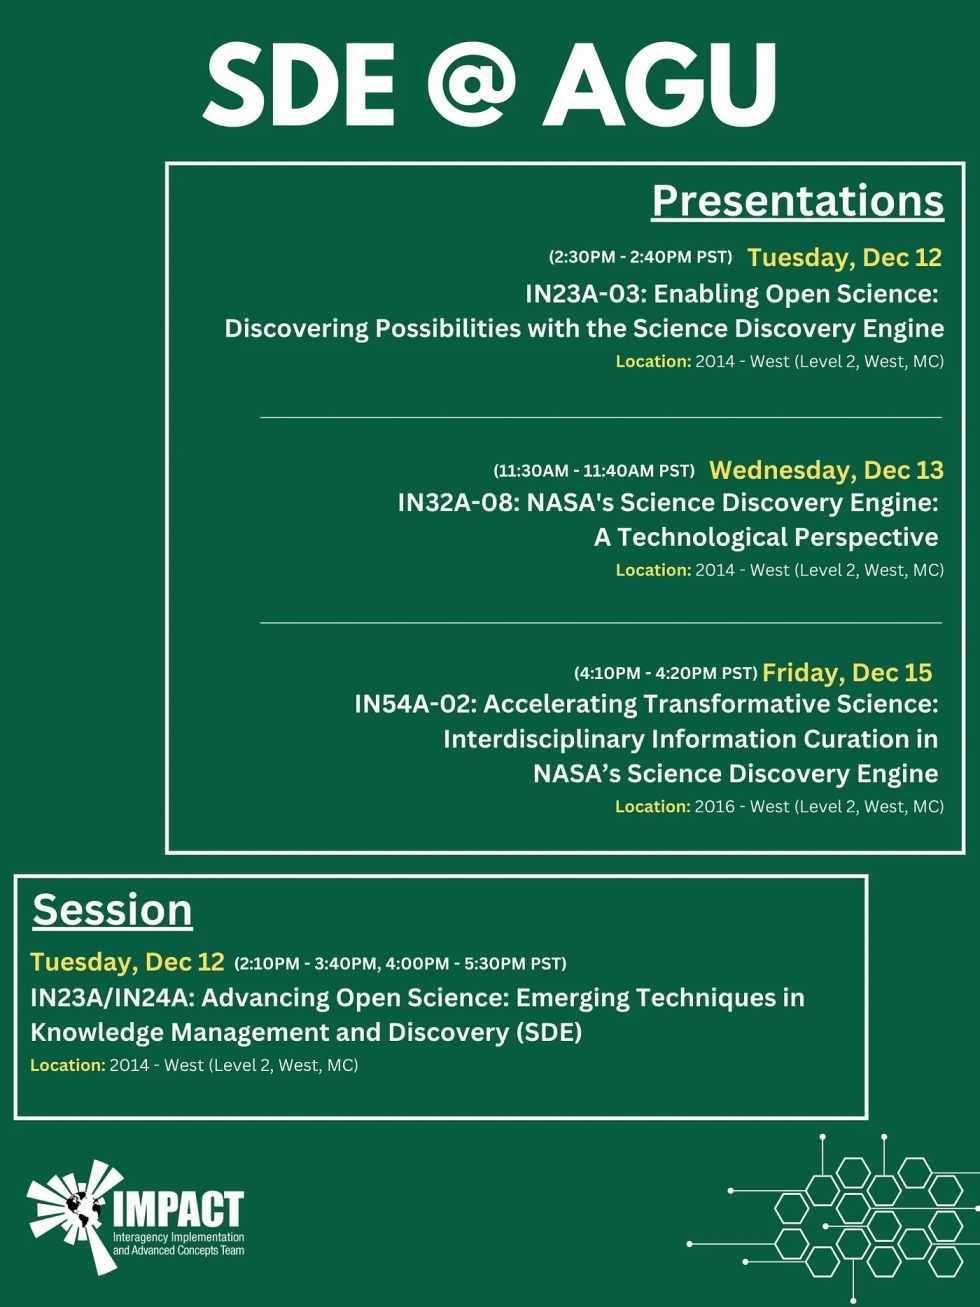 Poster for sessions hosted by NASA's Science Discovery Engine at the American Geophysical Union's 2023 annual meeting